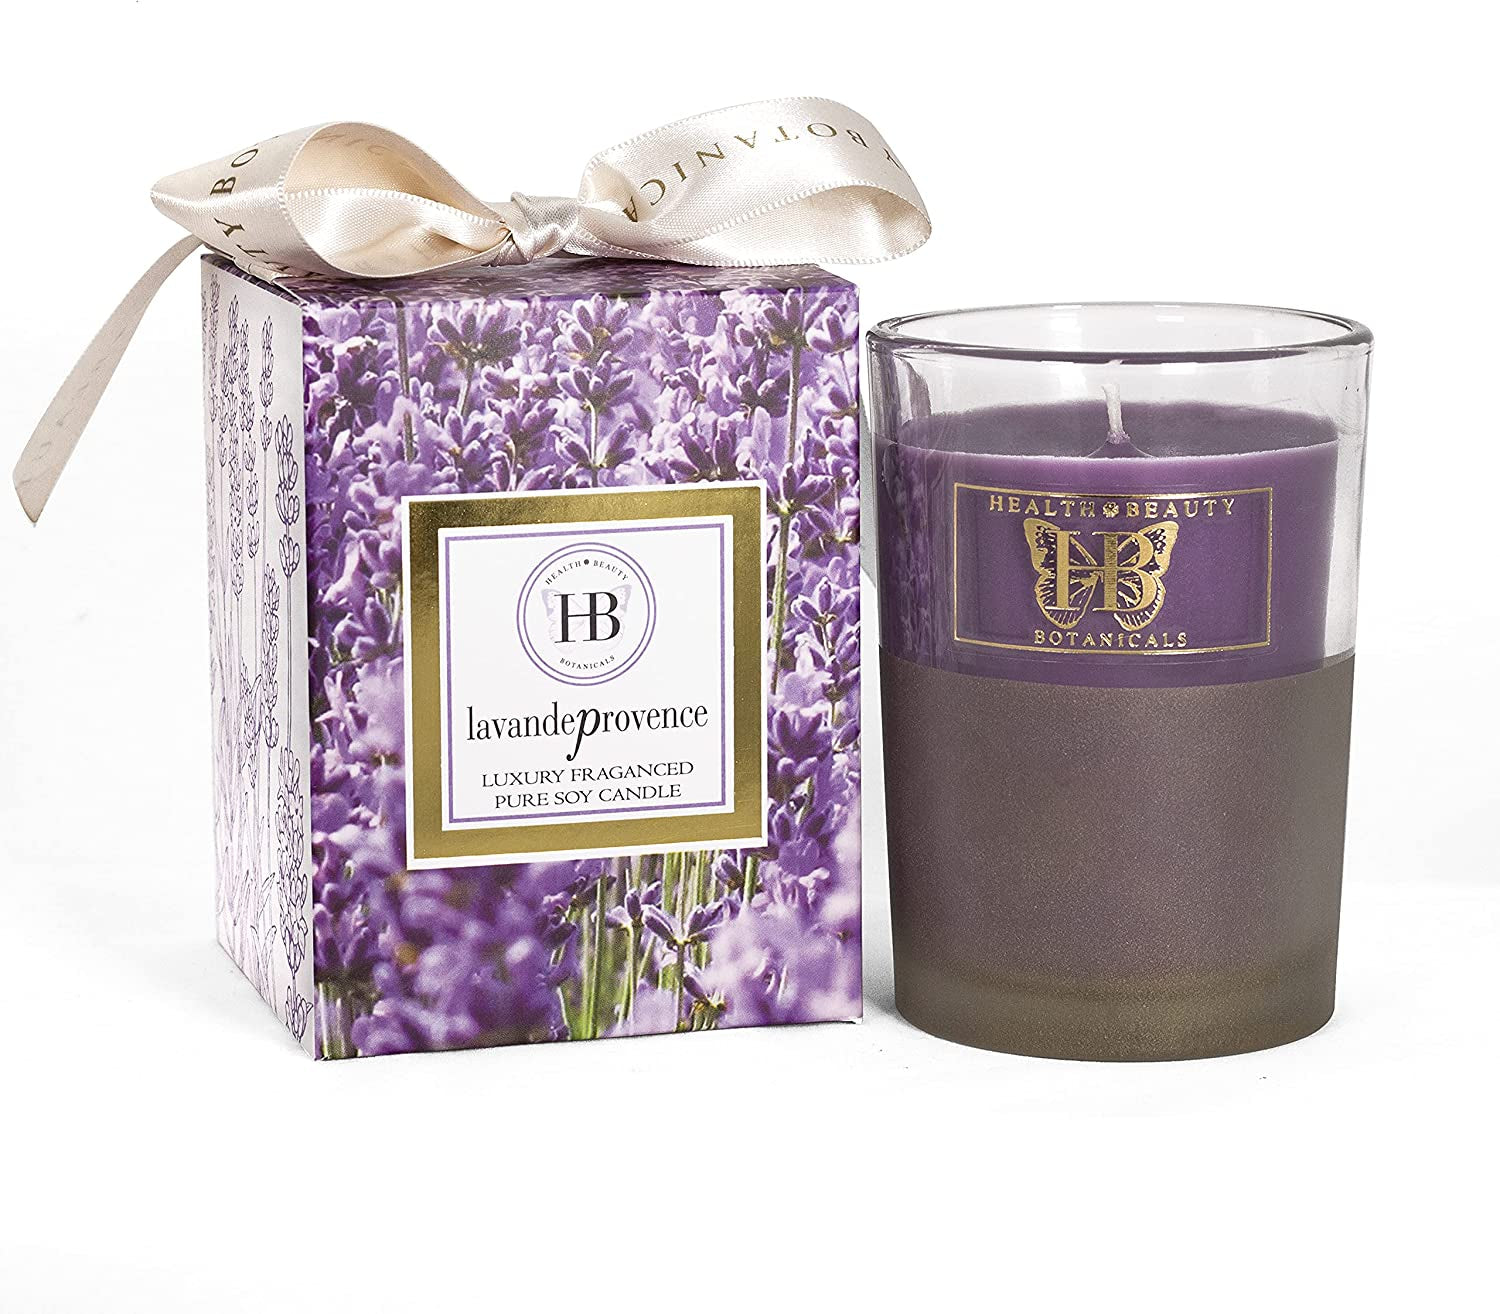 HB Botanicals Luxury Candle Lavande Provence Highly Scented Soy Candle Lavender Wax. Clean Burn in 7.5 Oz Frosted Gold Glass. Beautiful Gold Embossed Gift Box. Gift Wrapped! Safe Cotton Wick